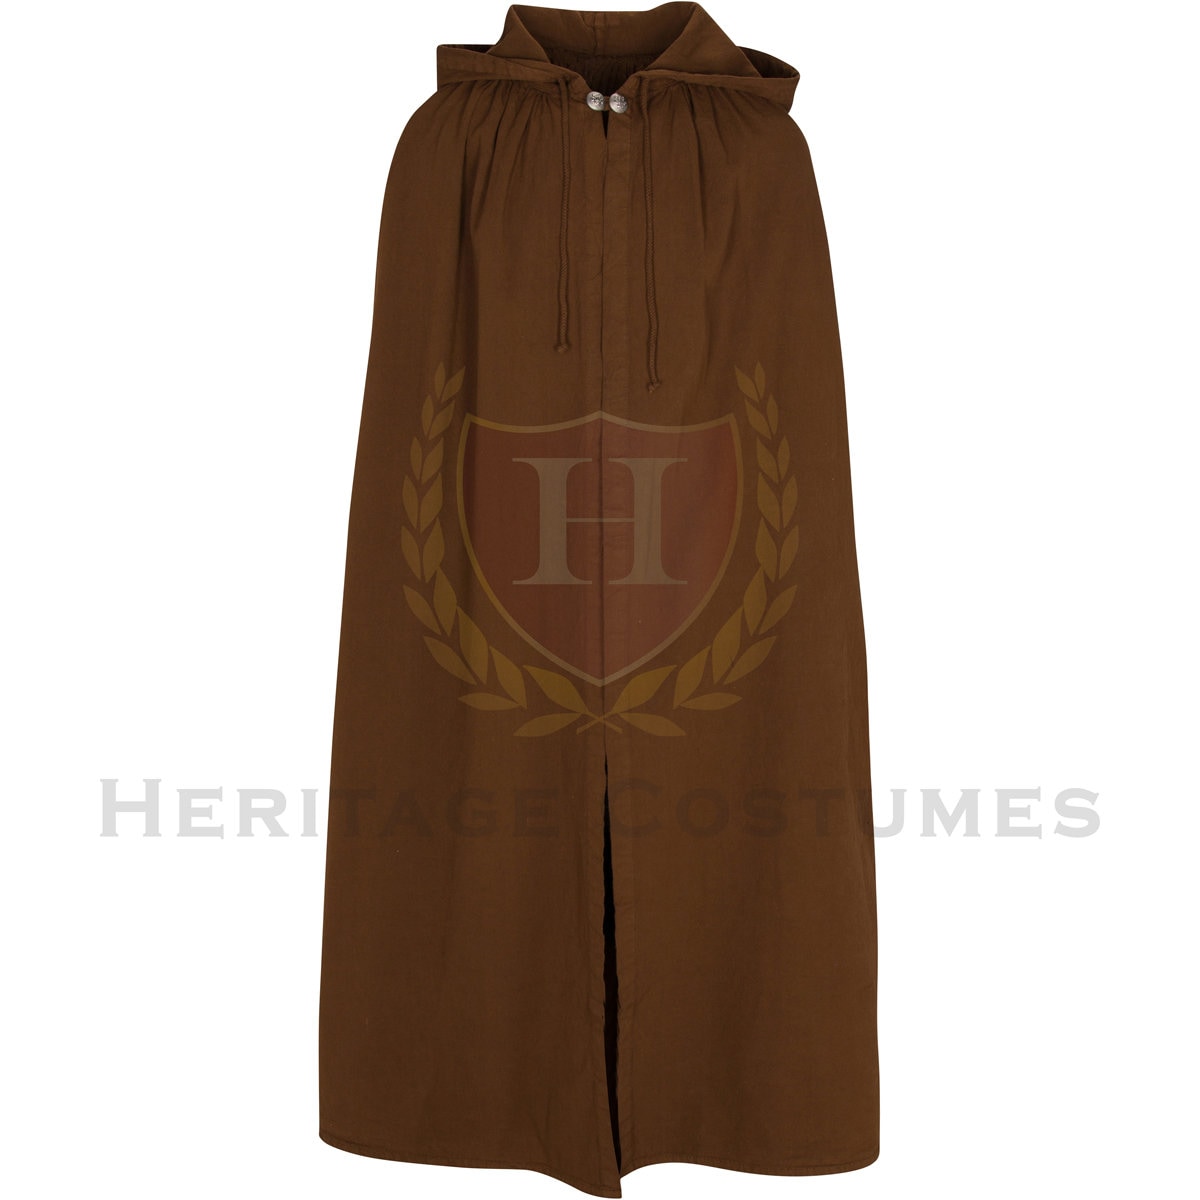 Renaissance Hooded Cloak with Clasp